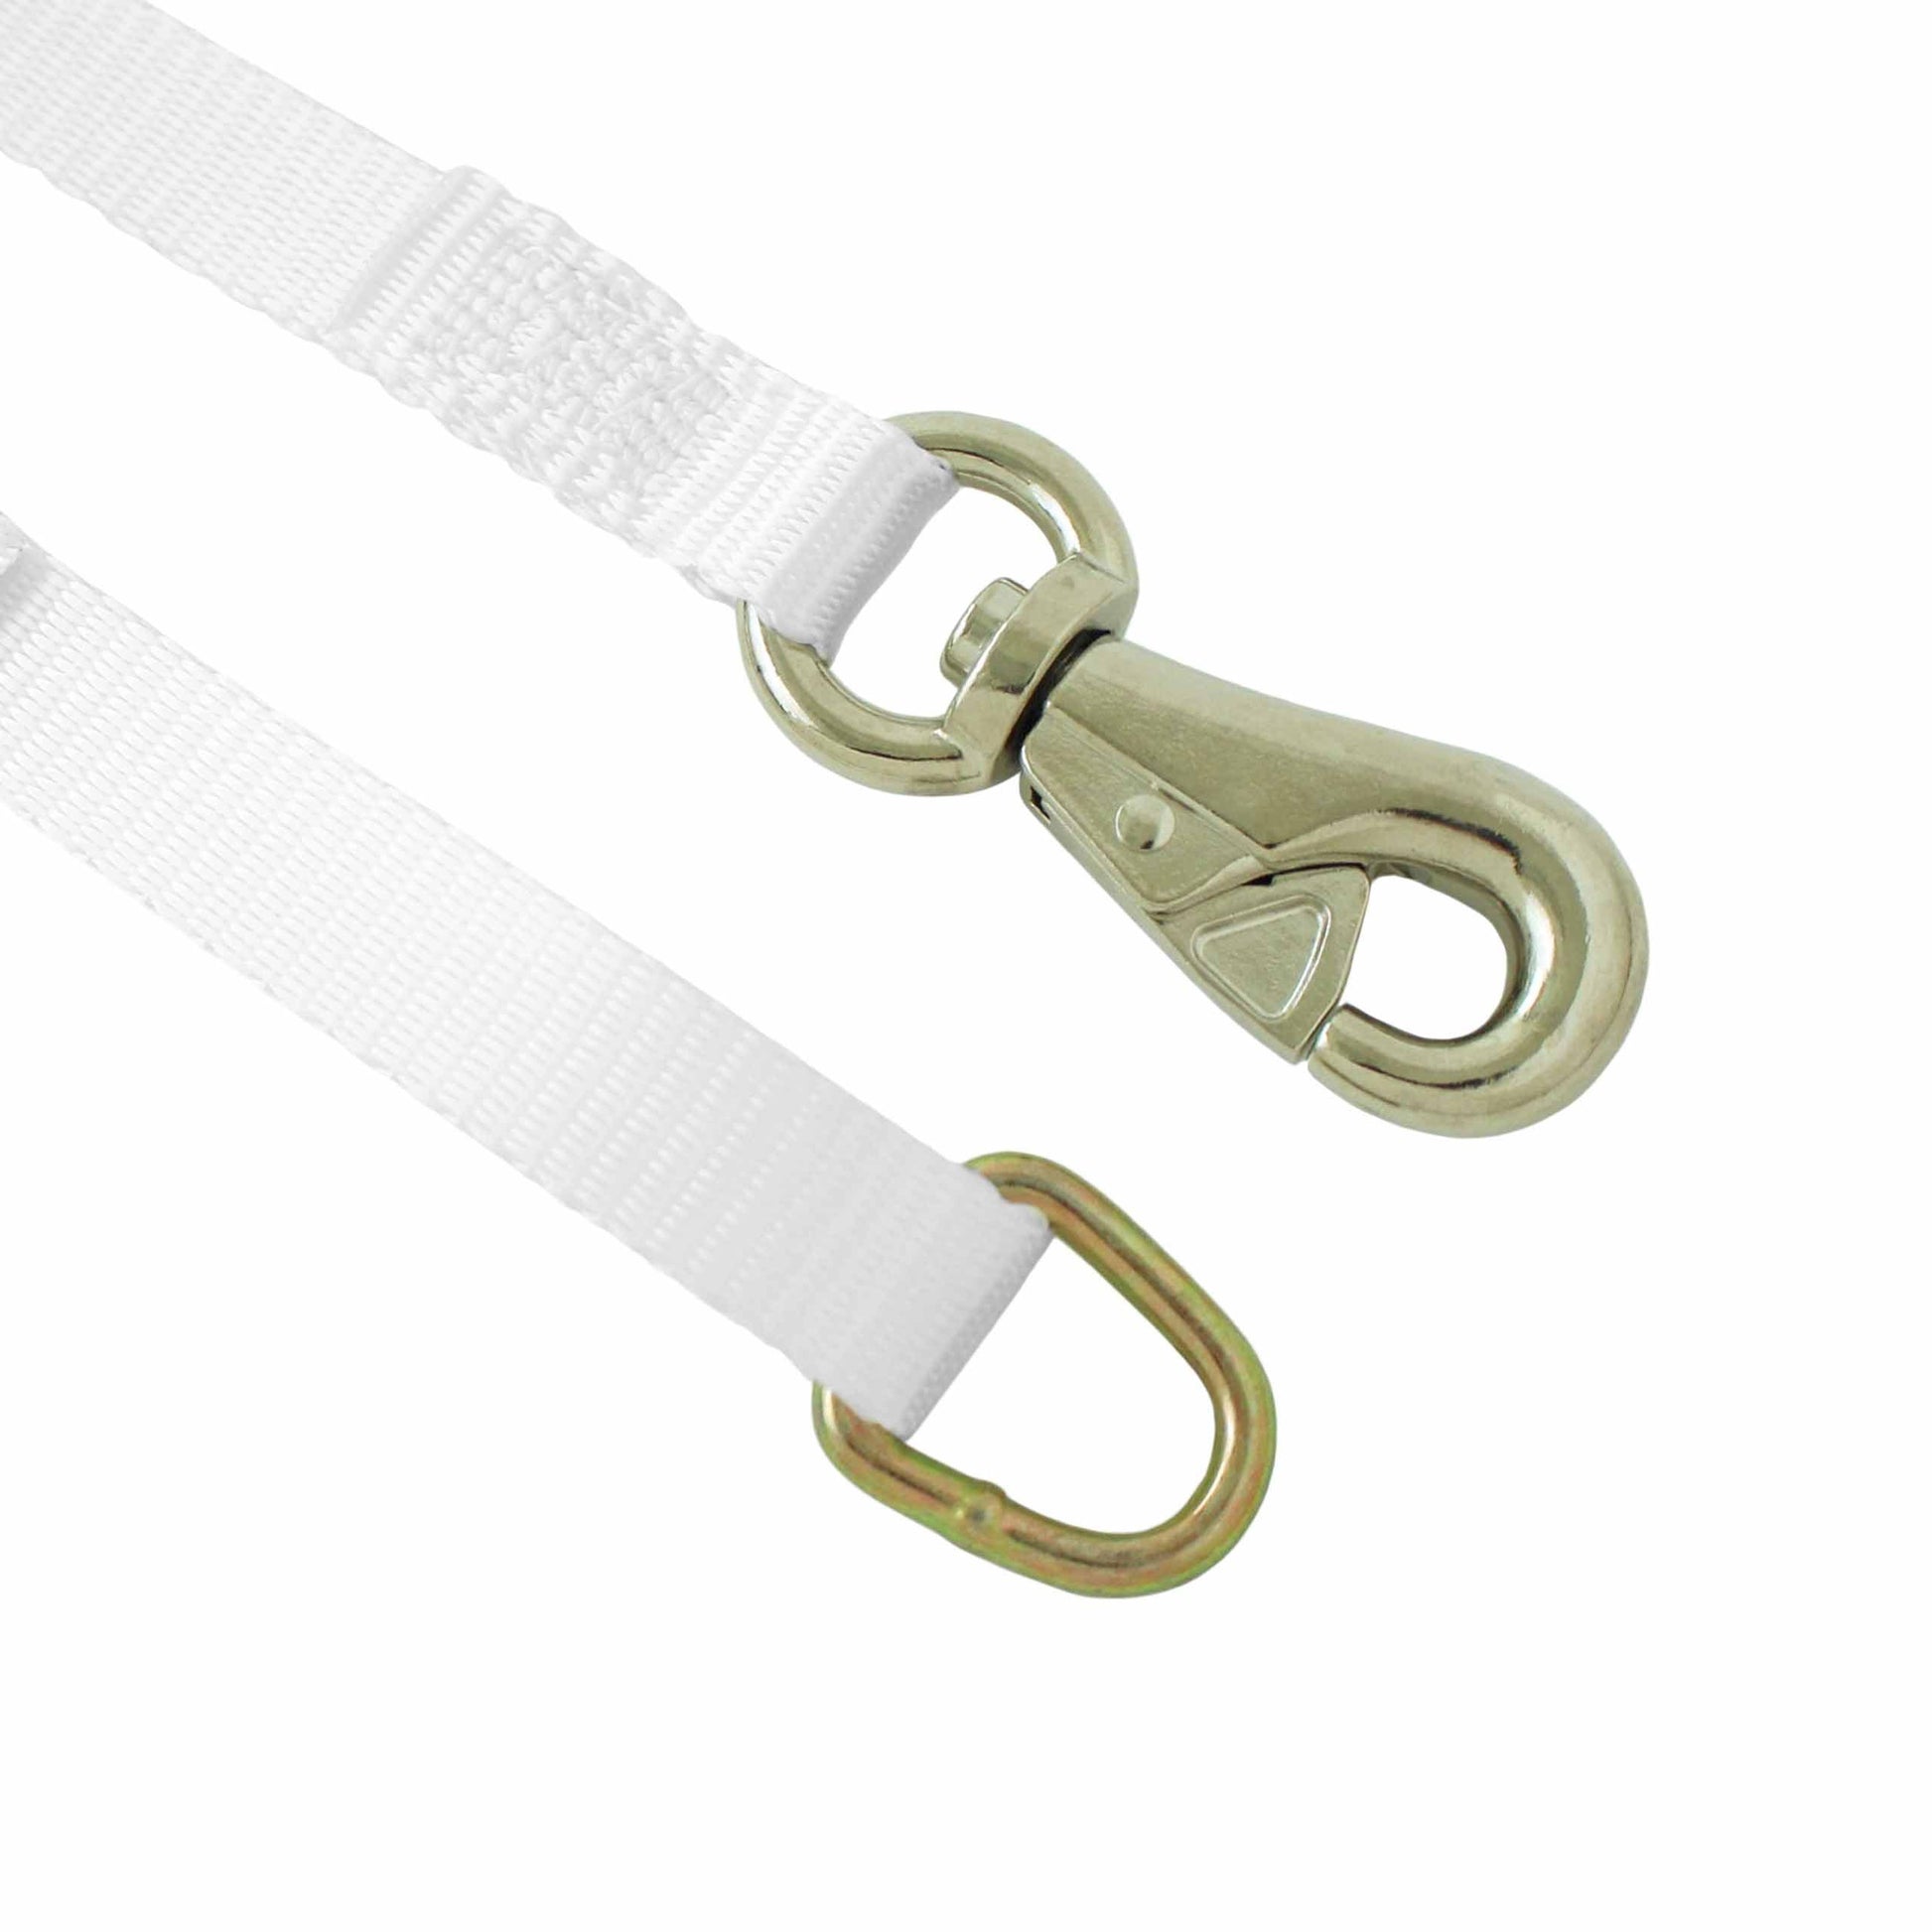 Boxer Tent Cam Buckle Tie Down with D Ring and Tent Snap Hook (1